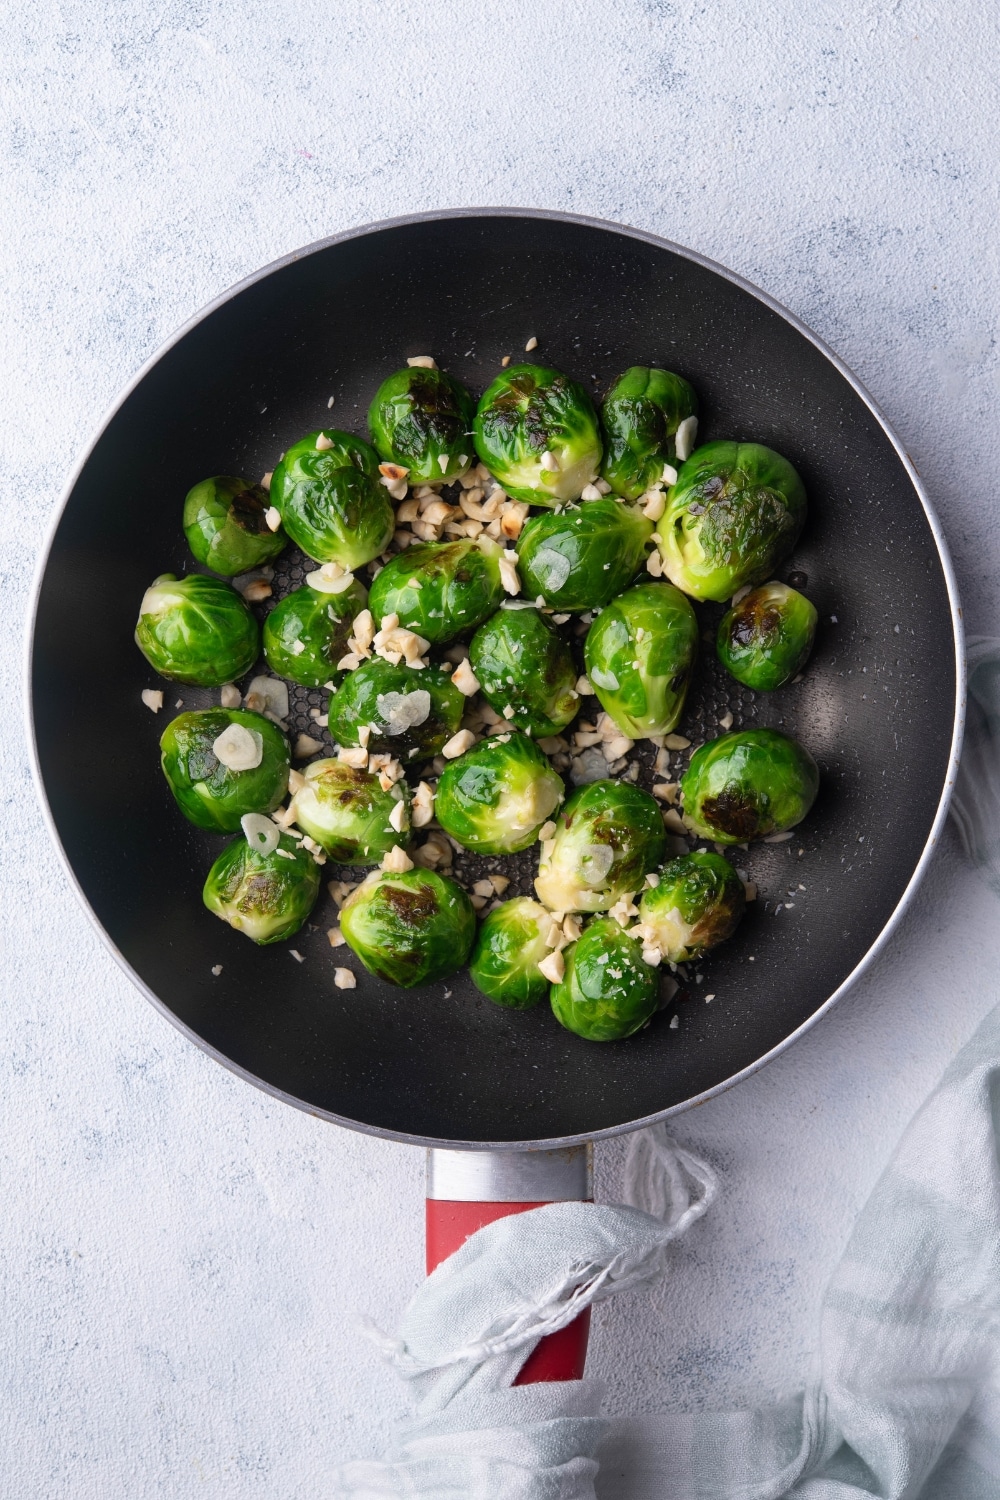 Sauteed brussels sprouts tossed with garlic slices and chopped hazelnuts in a black pan. A tea towel is wrapped around the handle of the pan.